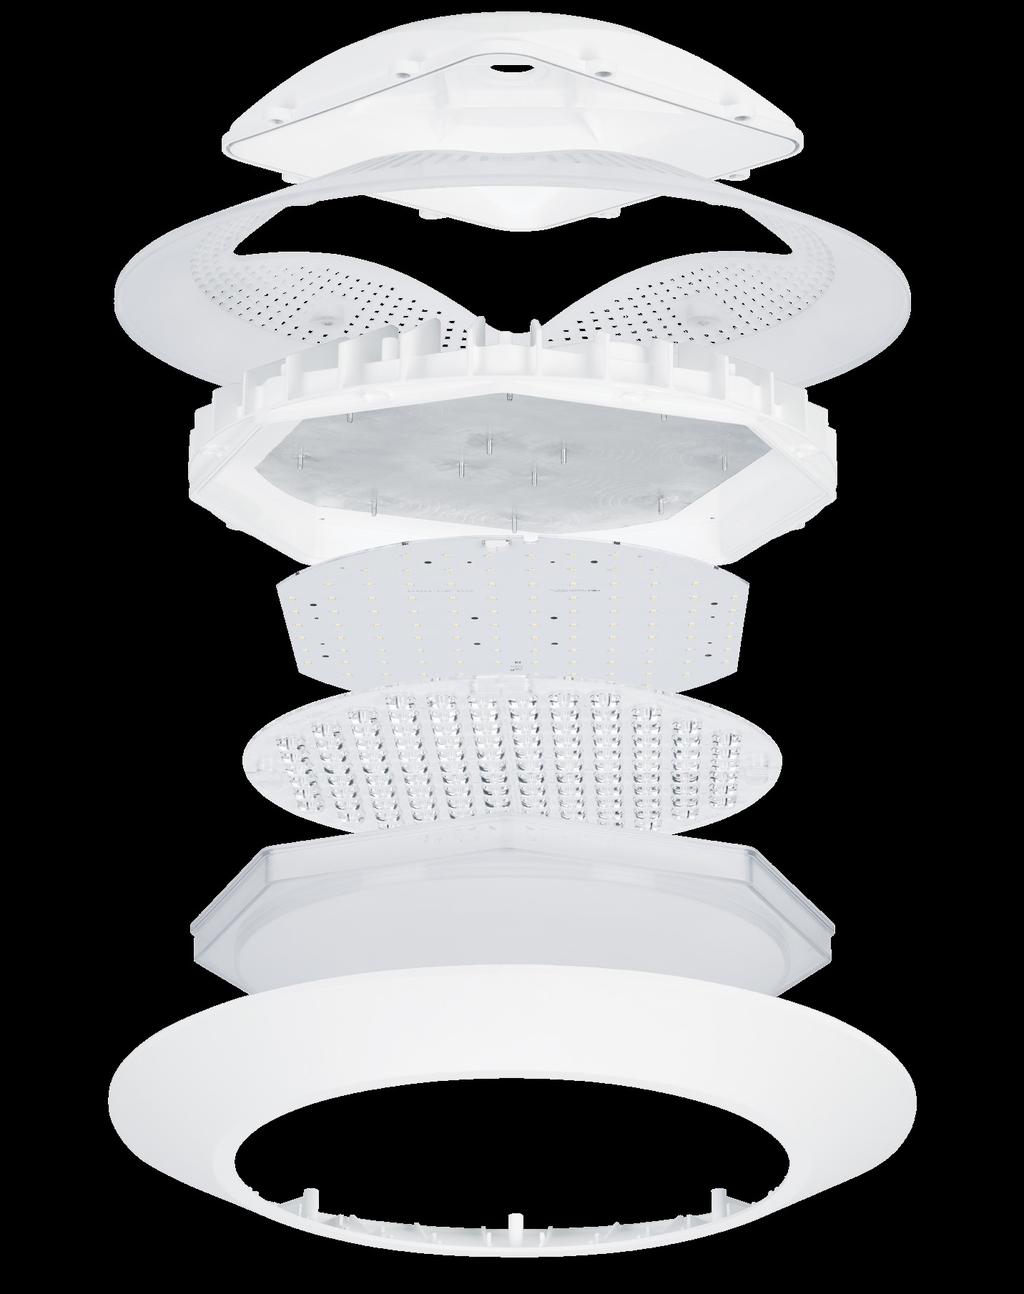 SenScape Luminaires 5 Designed From the Ground Up for use in a Variety of Applications The New SenScape SPG18 Series shares many of the attributes you love about the award-winning TekDek TD17 Series,